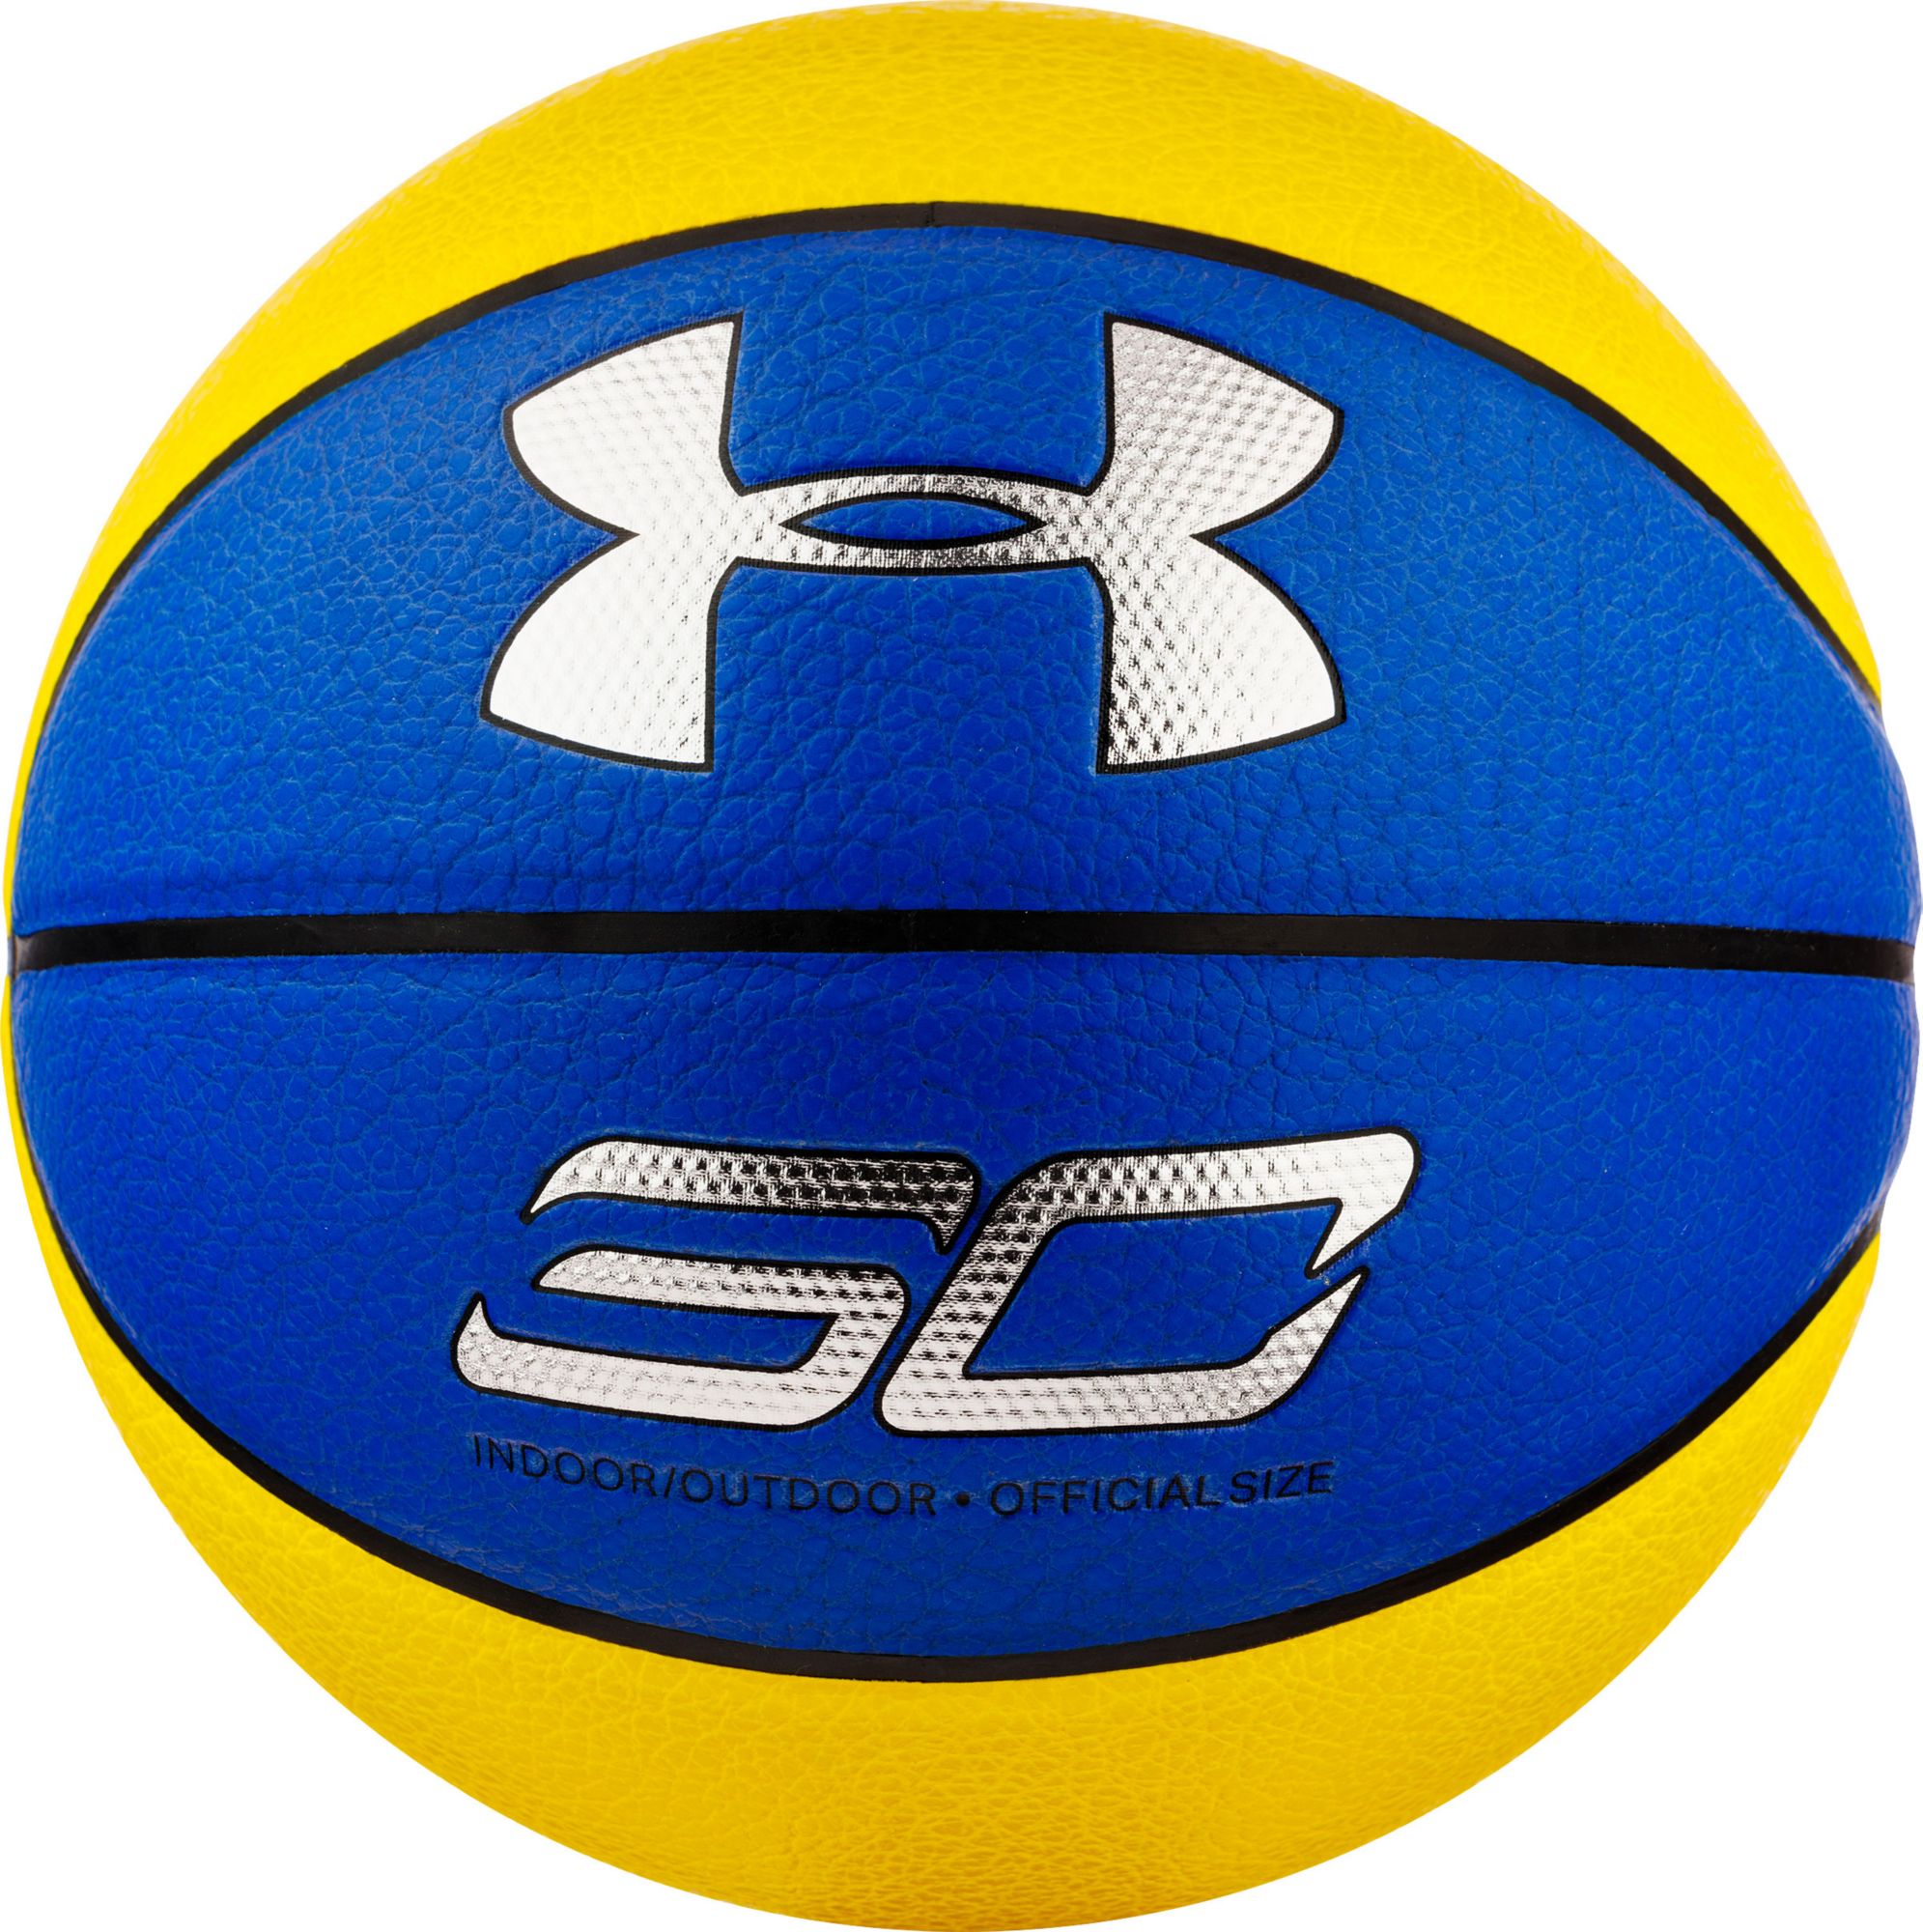 Under Armour Stephen Curry Official Basketball (29.5) | DICK'S ...